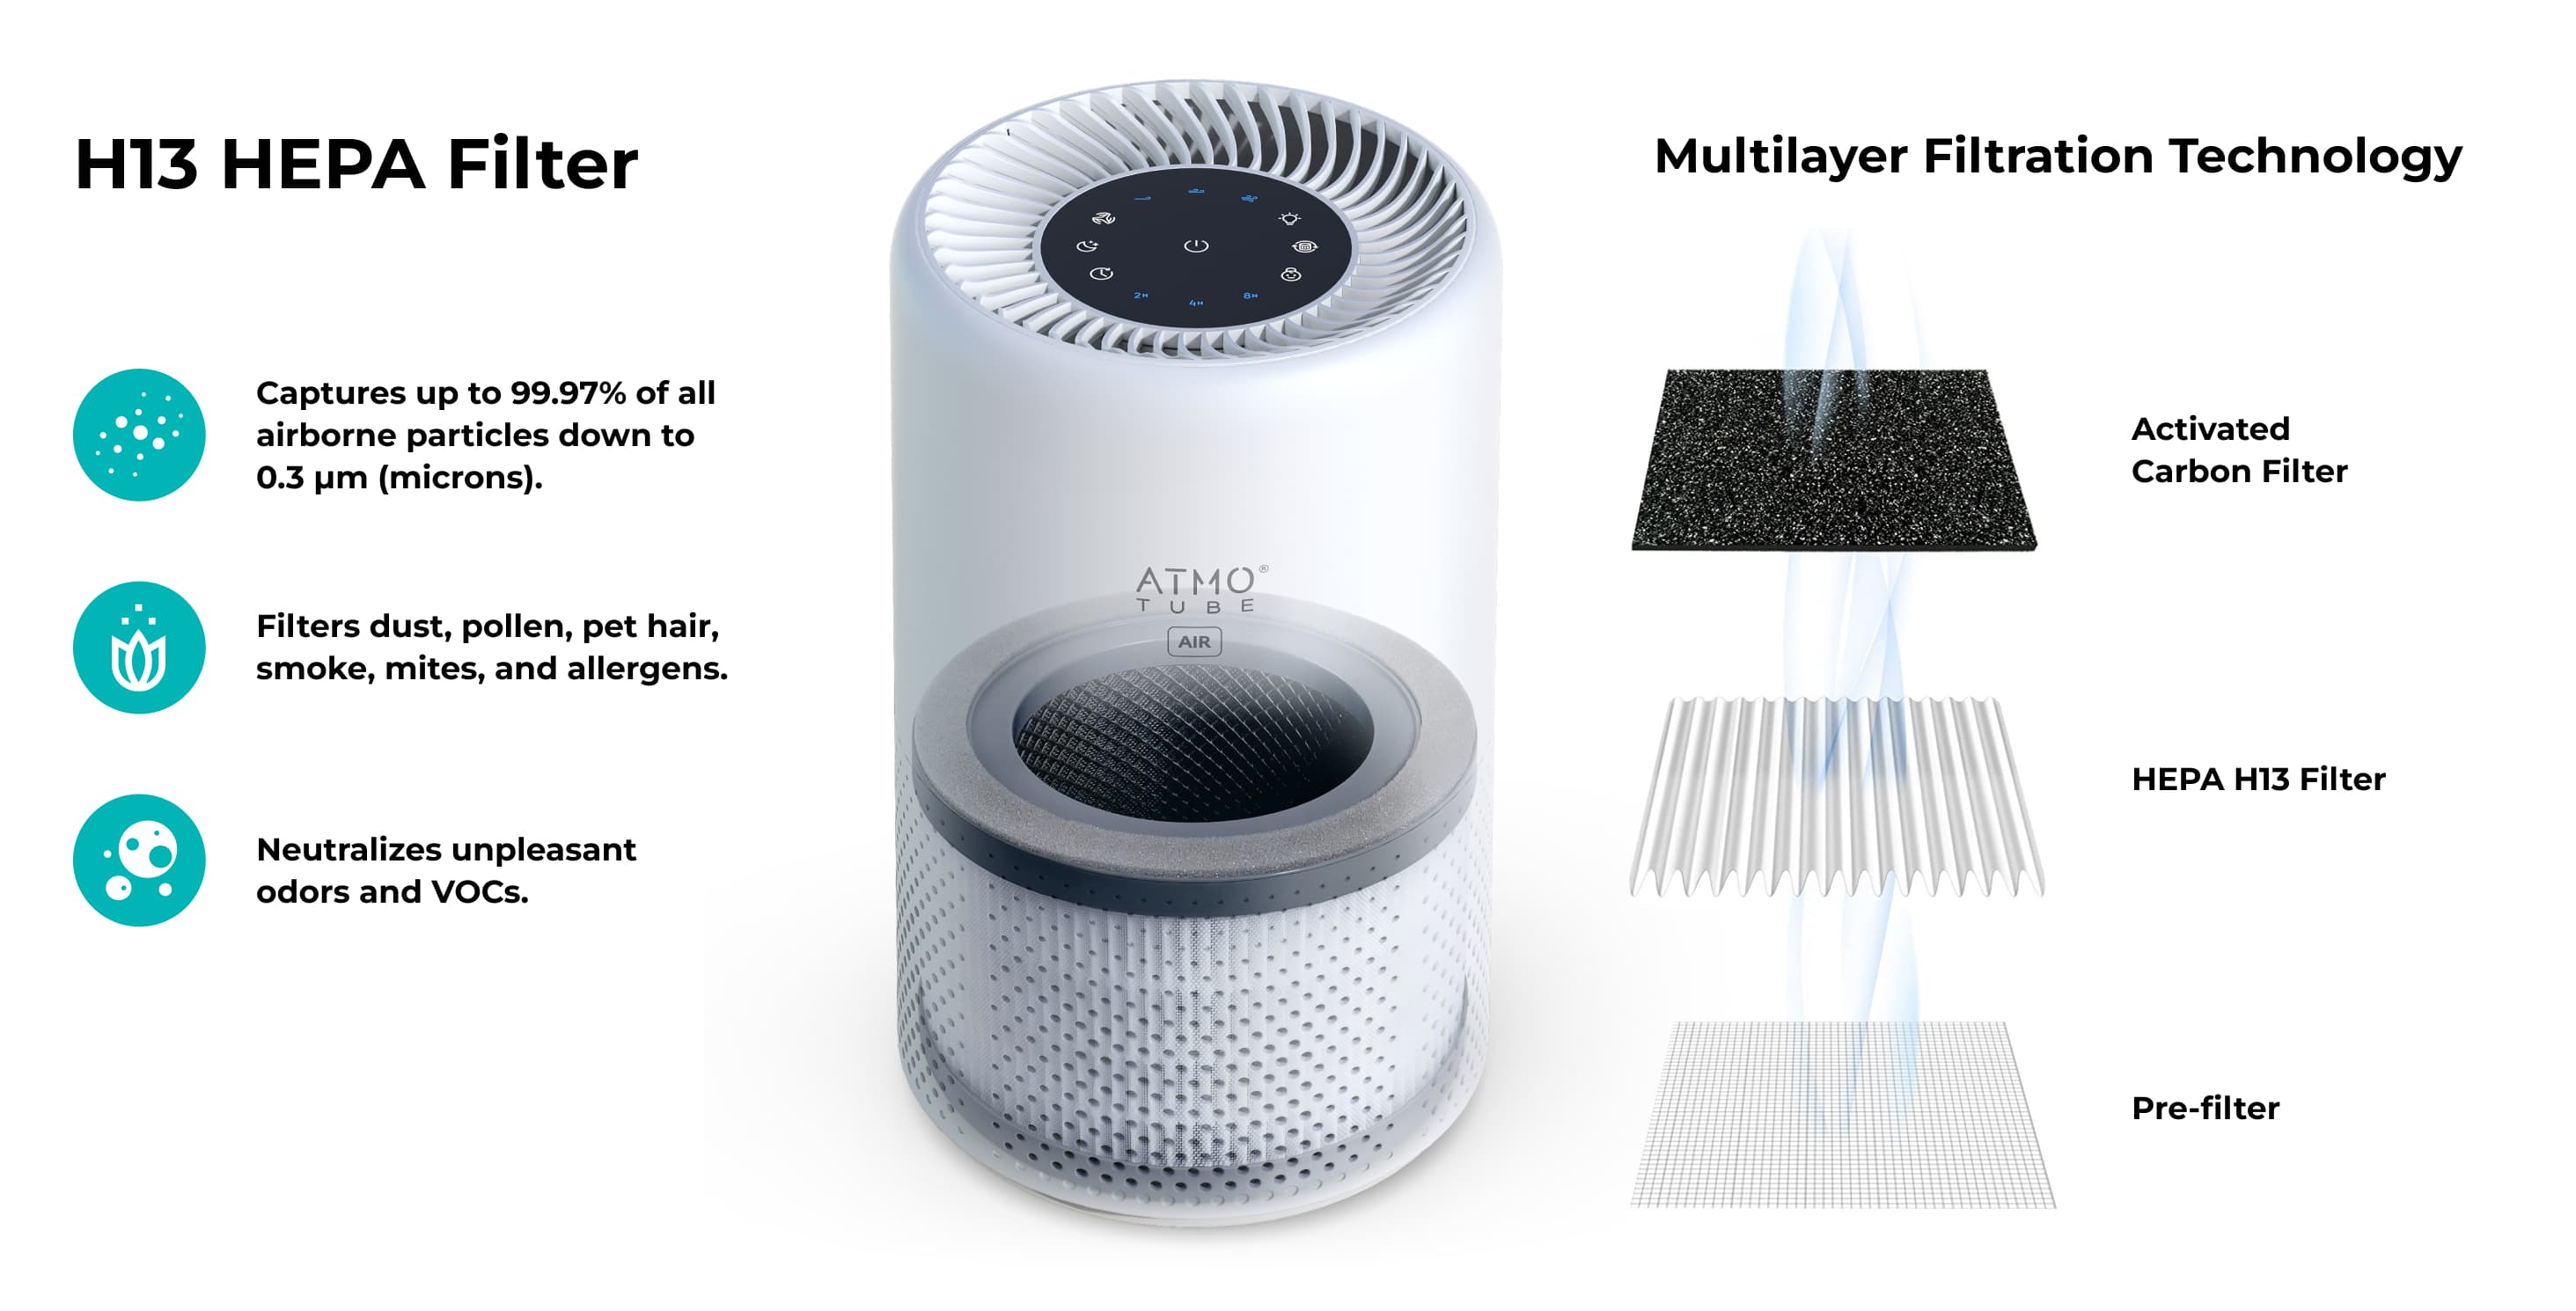 Atmotube AIR® — H13 HEPA Filter. Multilayer Filtration Technology